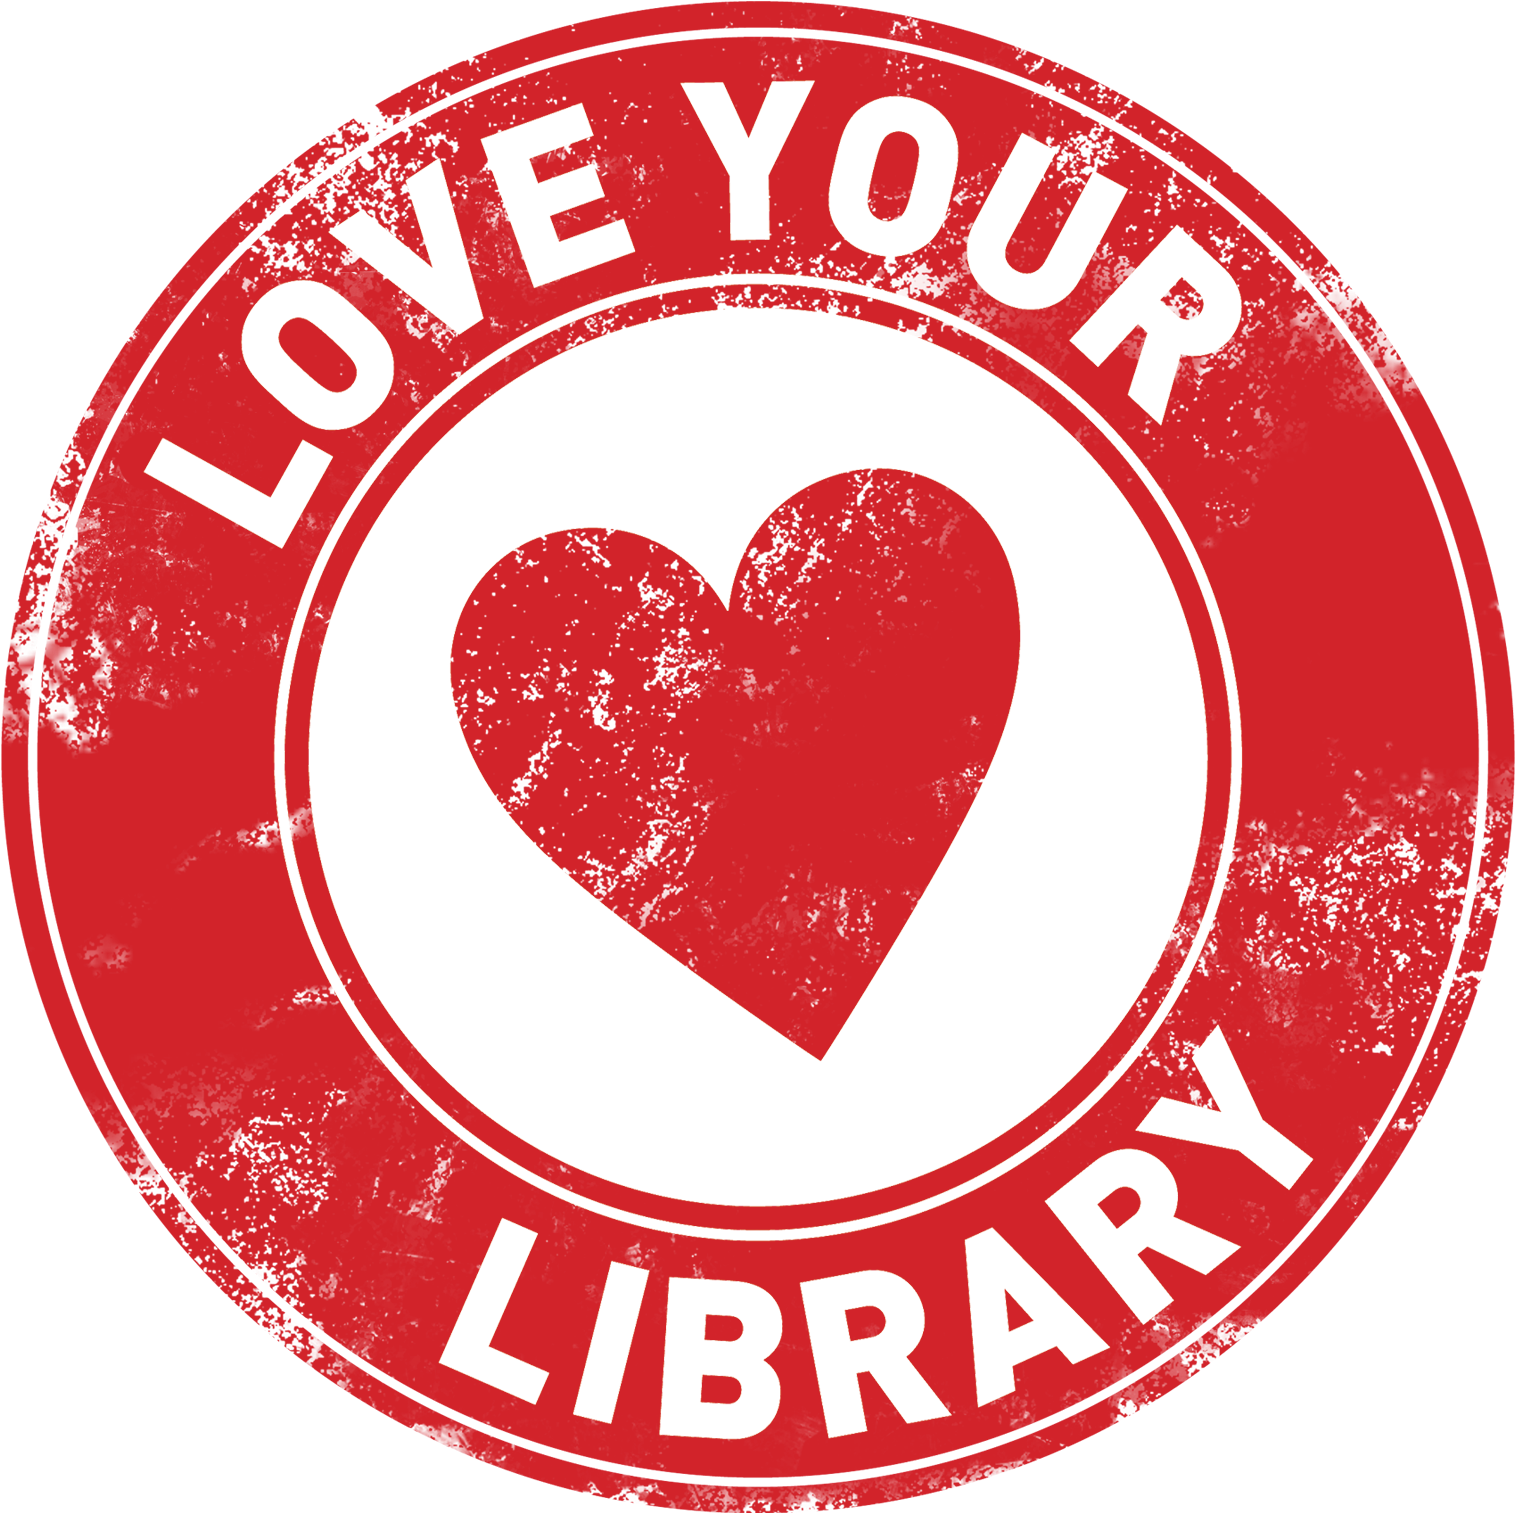 #cdnschoollibraryday Hashtag On Twitter - National Library Lover's Month (1709x1656)